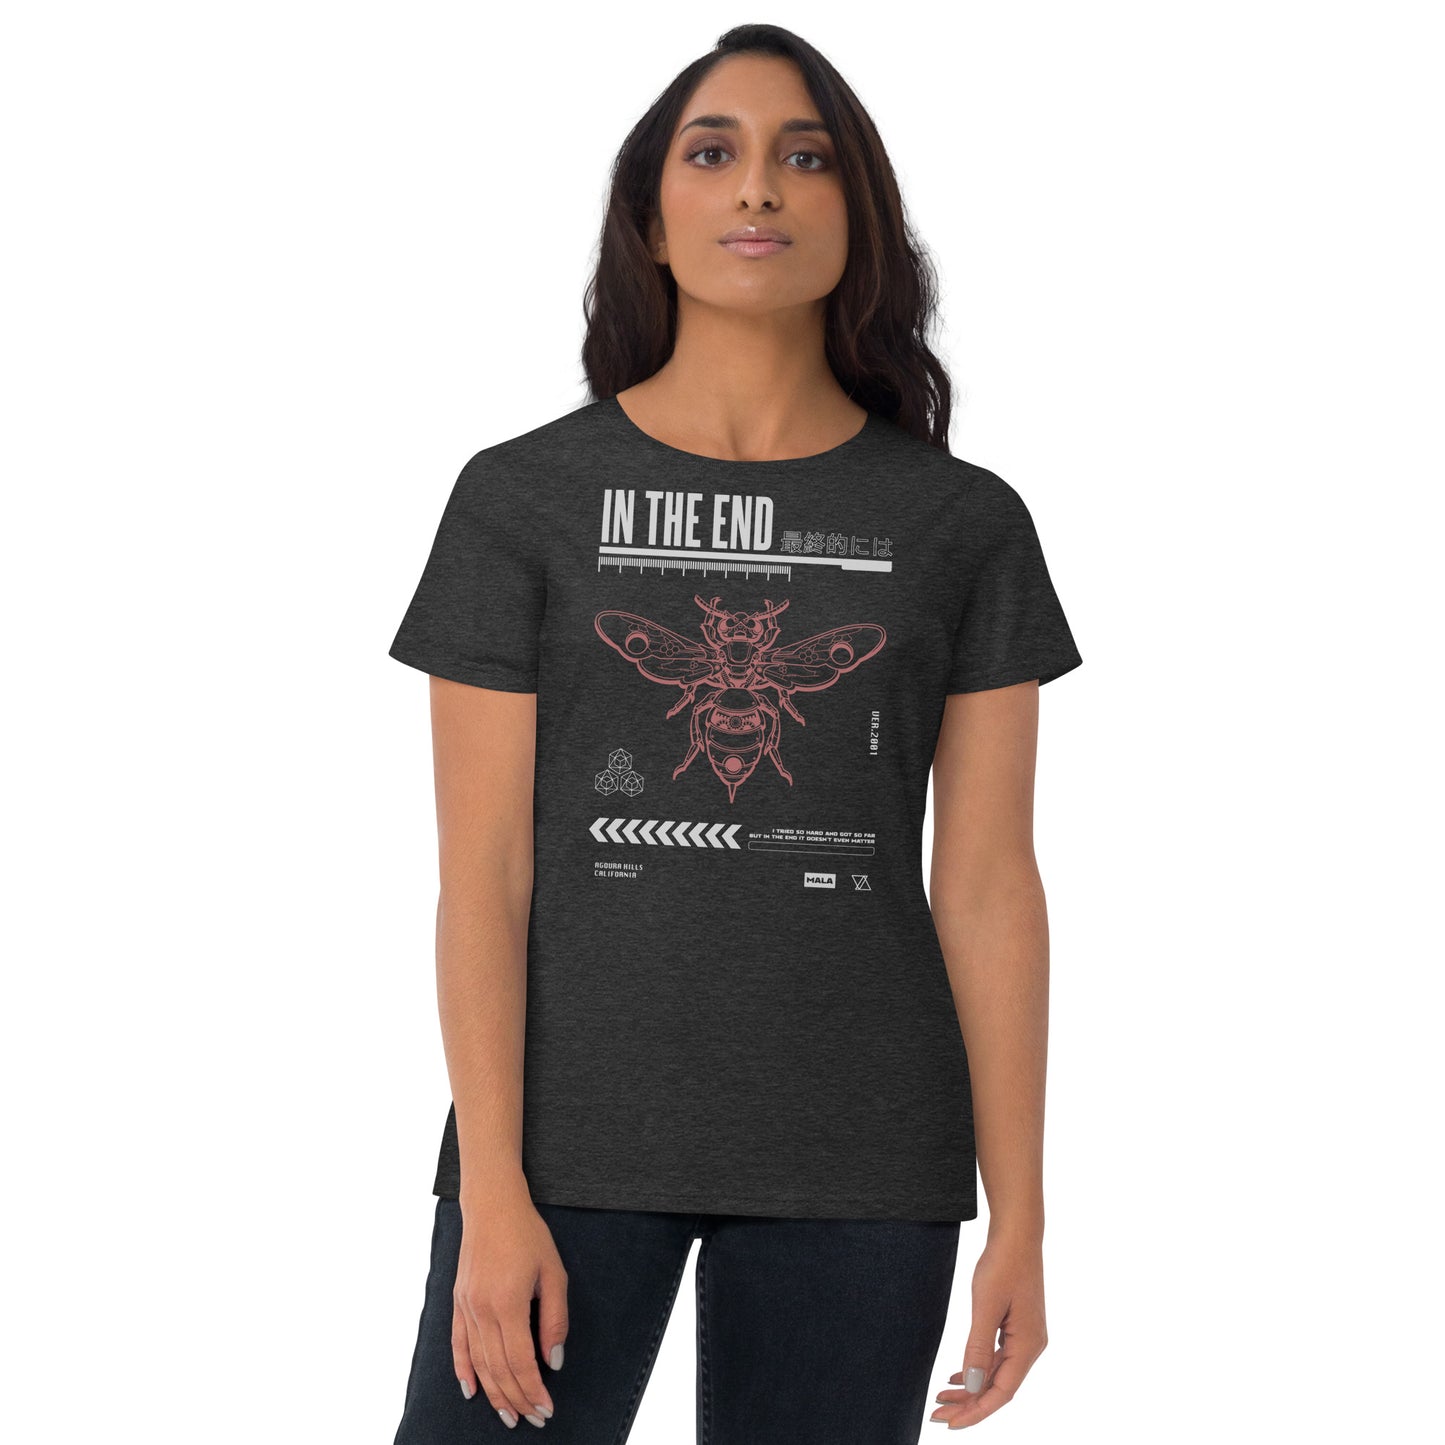 In The End - Women's T-shirt